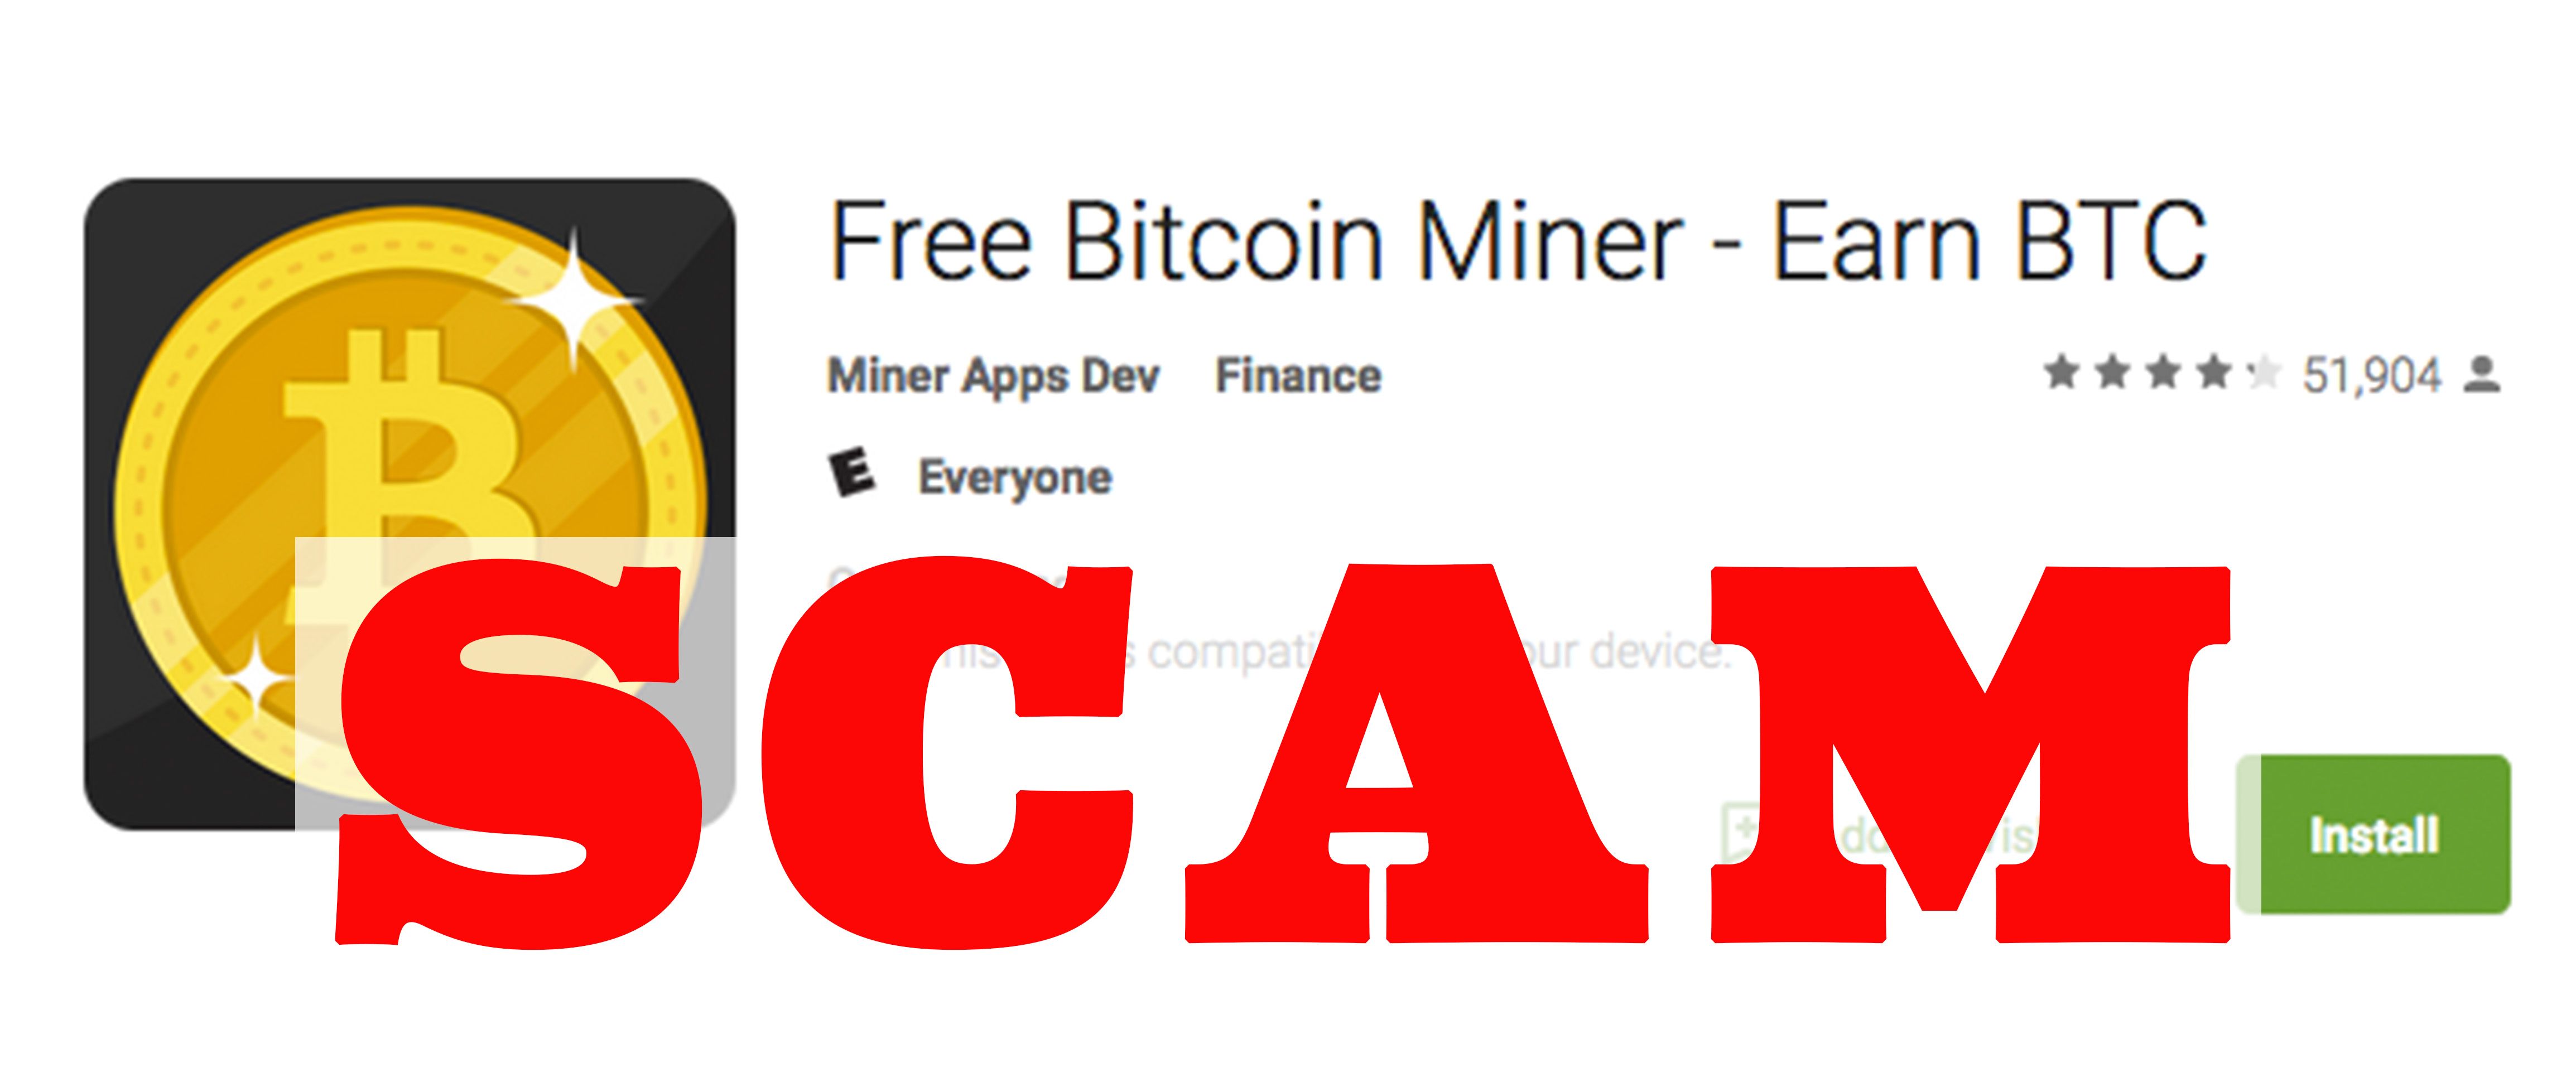 Scam Alert Free Bitcoin Miner App For Android By Miner Apps Dev - 